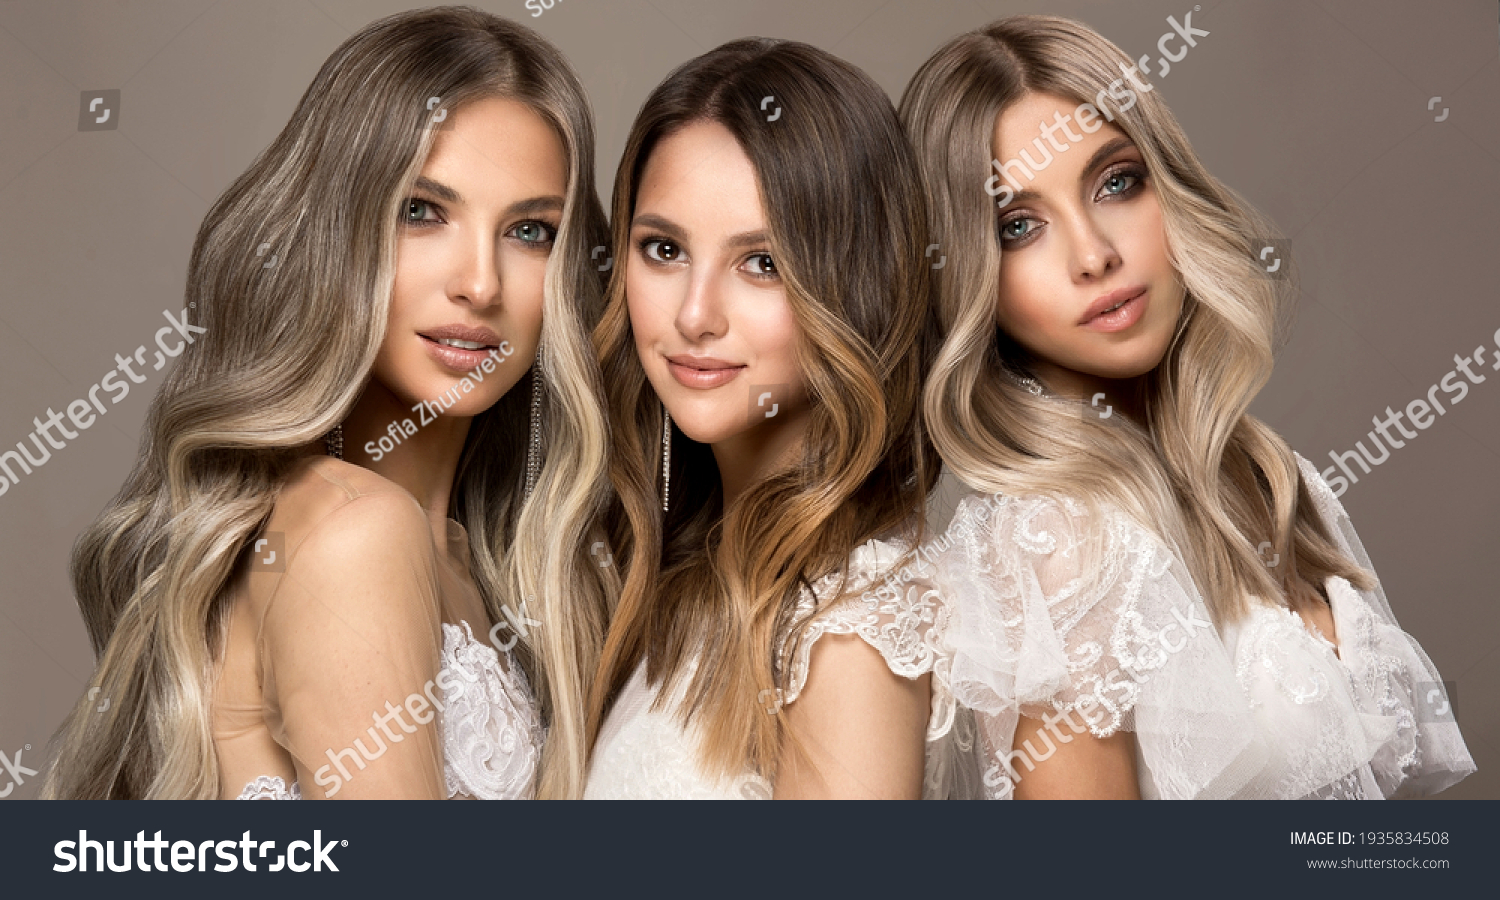 Three beautiful girls in  white wedding dresses  with hair coloring in ultra blond. Stylish hairstyle curls done in a beauty salon. Fashion, cosmetics and makeup.Adorable brides #1935834508